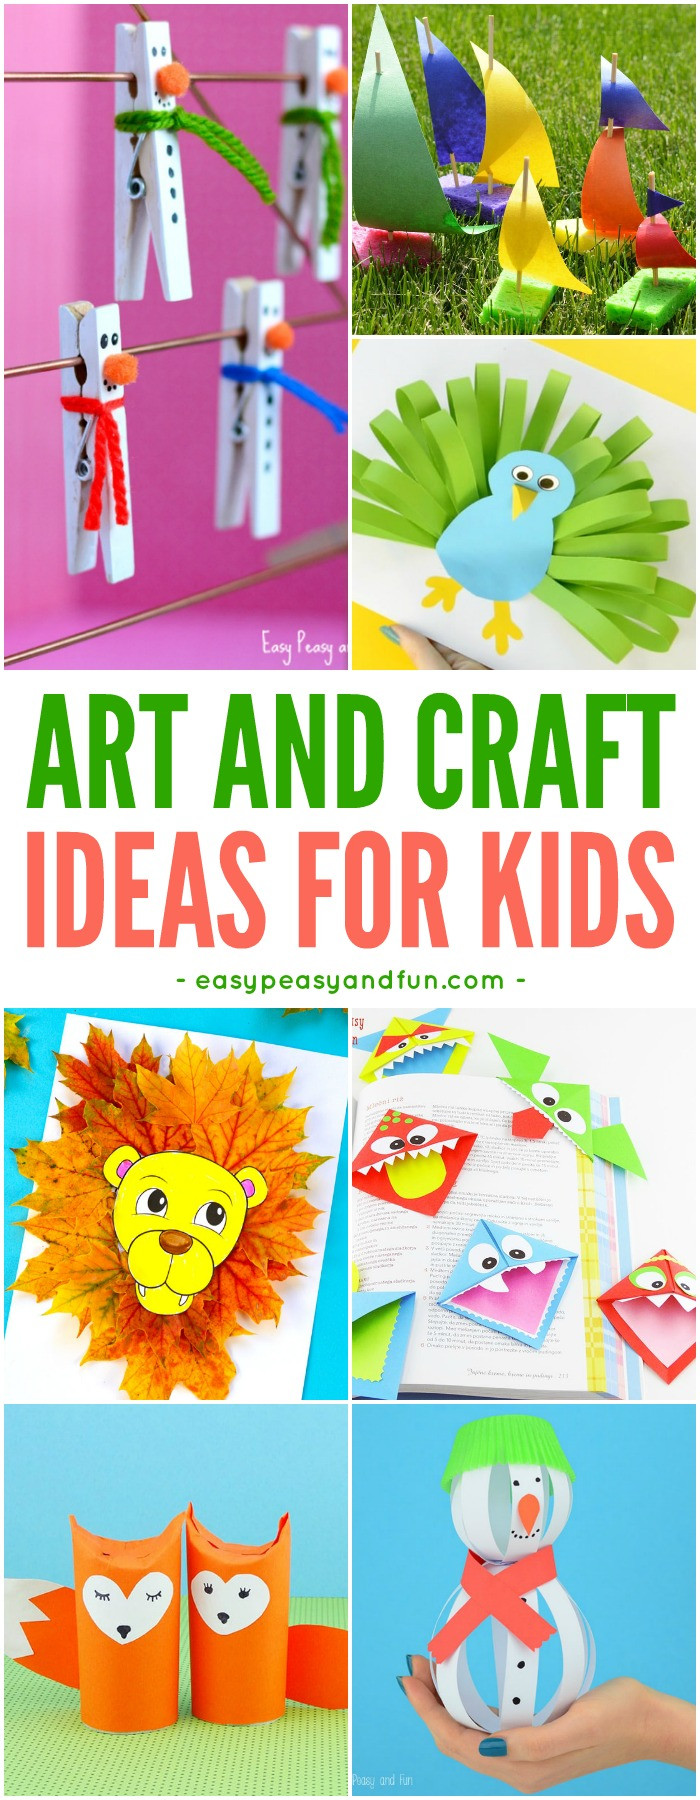 Easy Arts And Crafts For Toddlers
 Crafts For Kids Tons of Art and Craft Ideas for Kids to